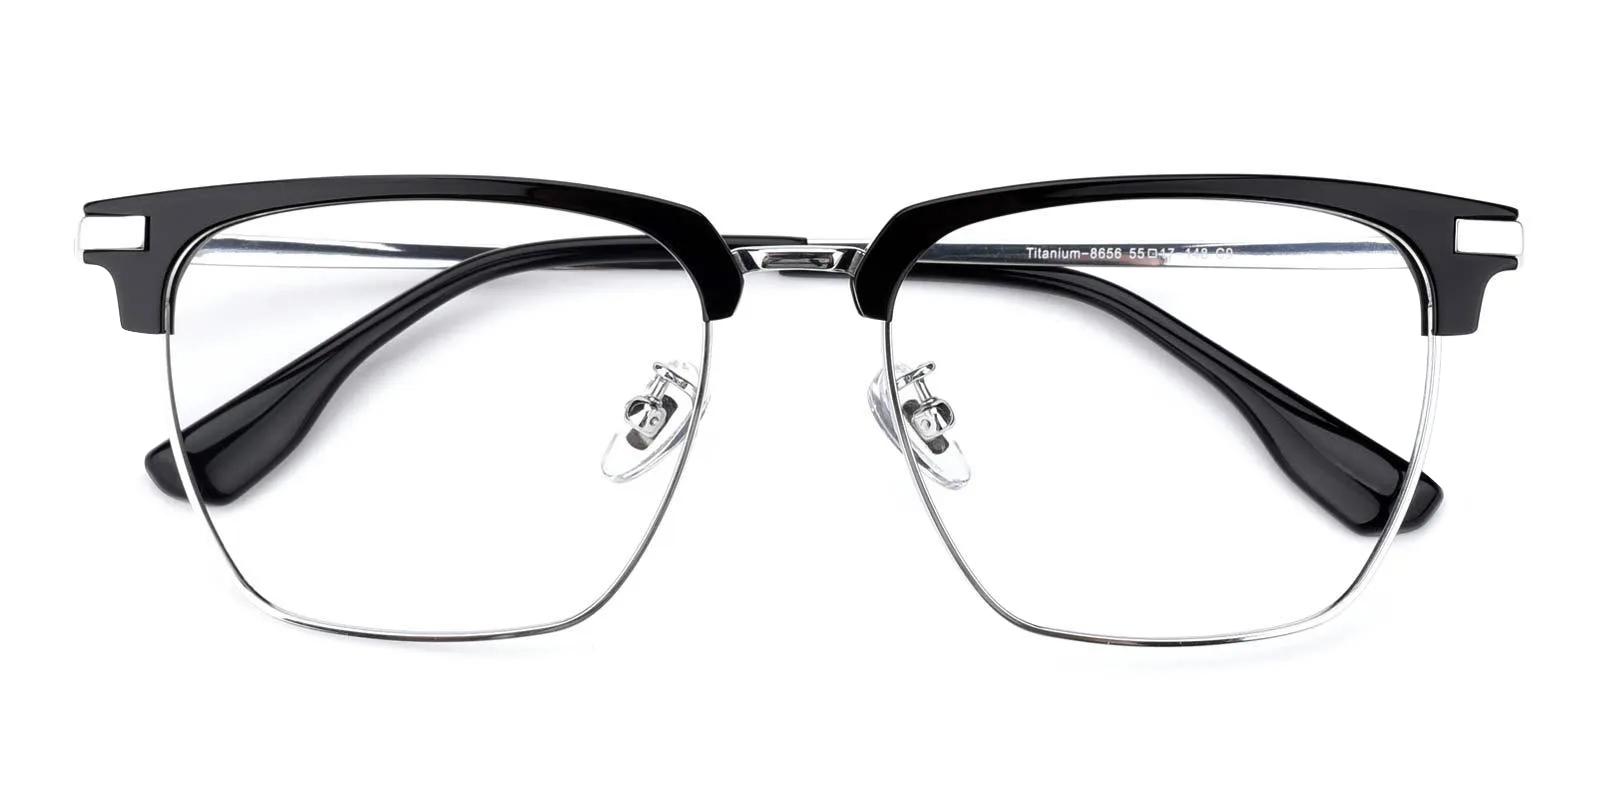 Pach Silver Acetate , Titanium Eyeglasses , NosePads Frames from ABBE Glasses